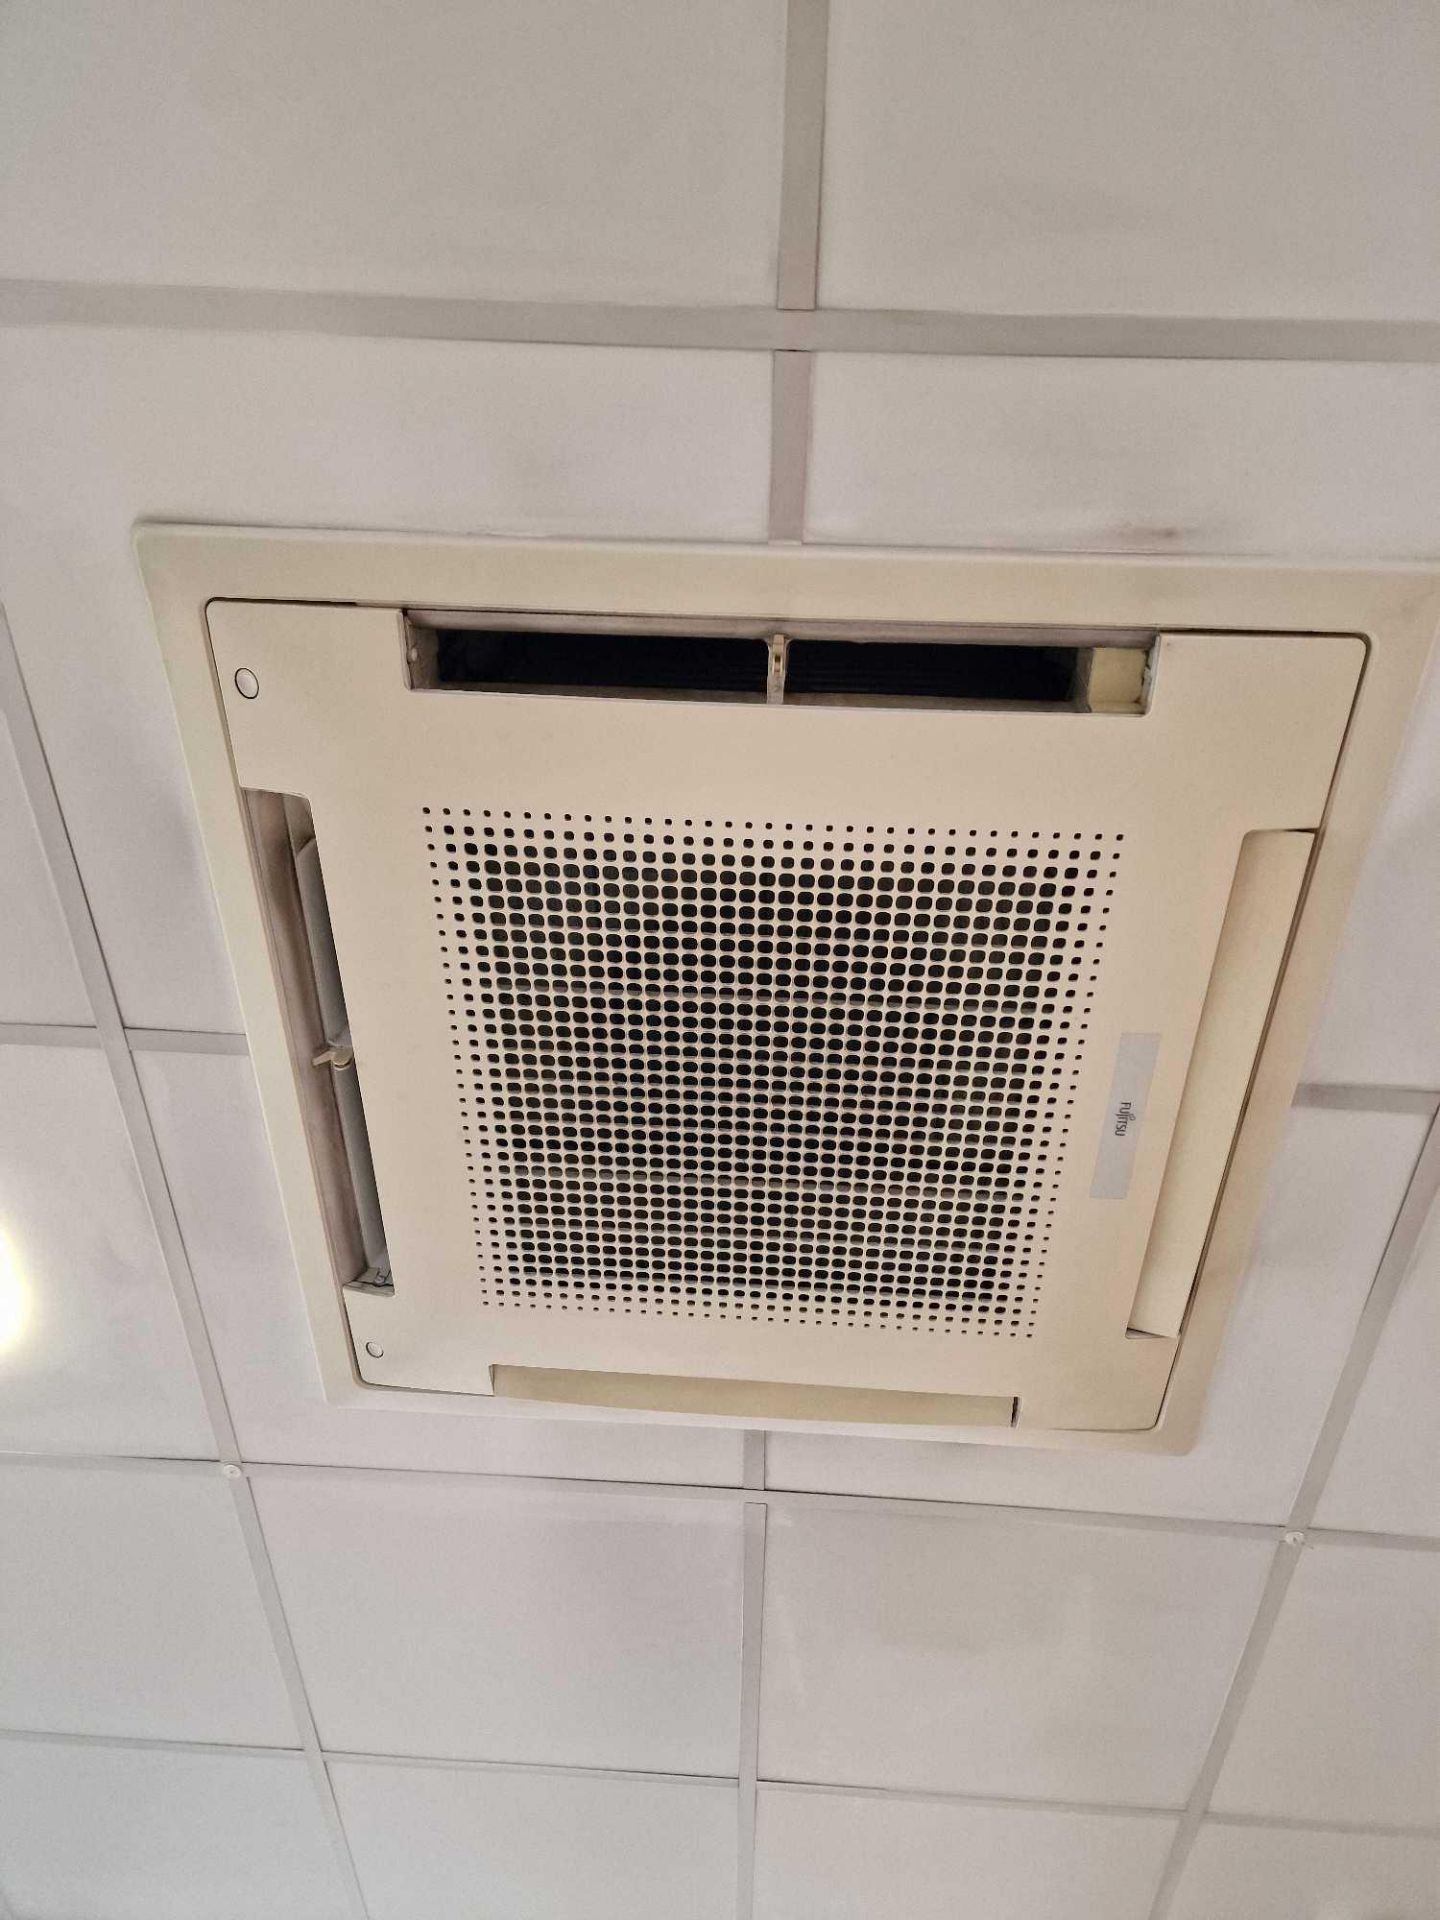 Fujitsu ceiling mounted Air Conditioning Unit- AOY54UMAYT Cooling capacity 14.5 kW The heating